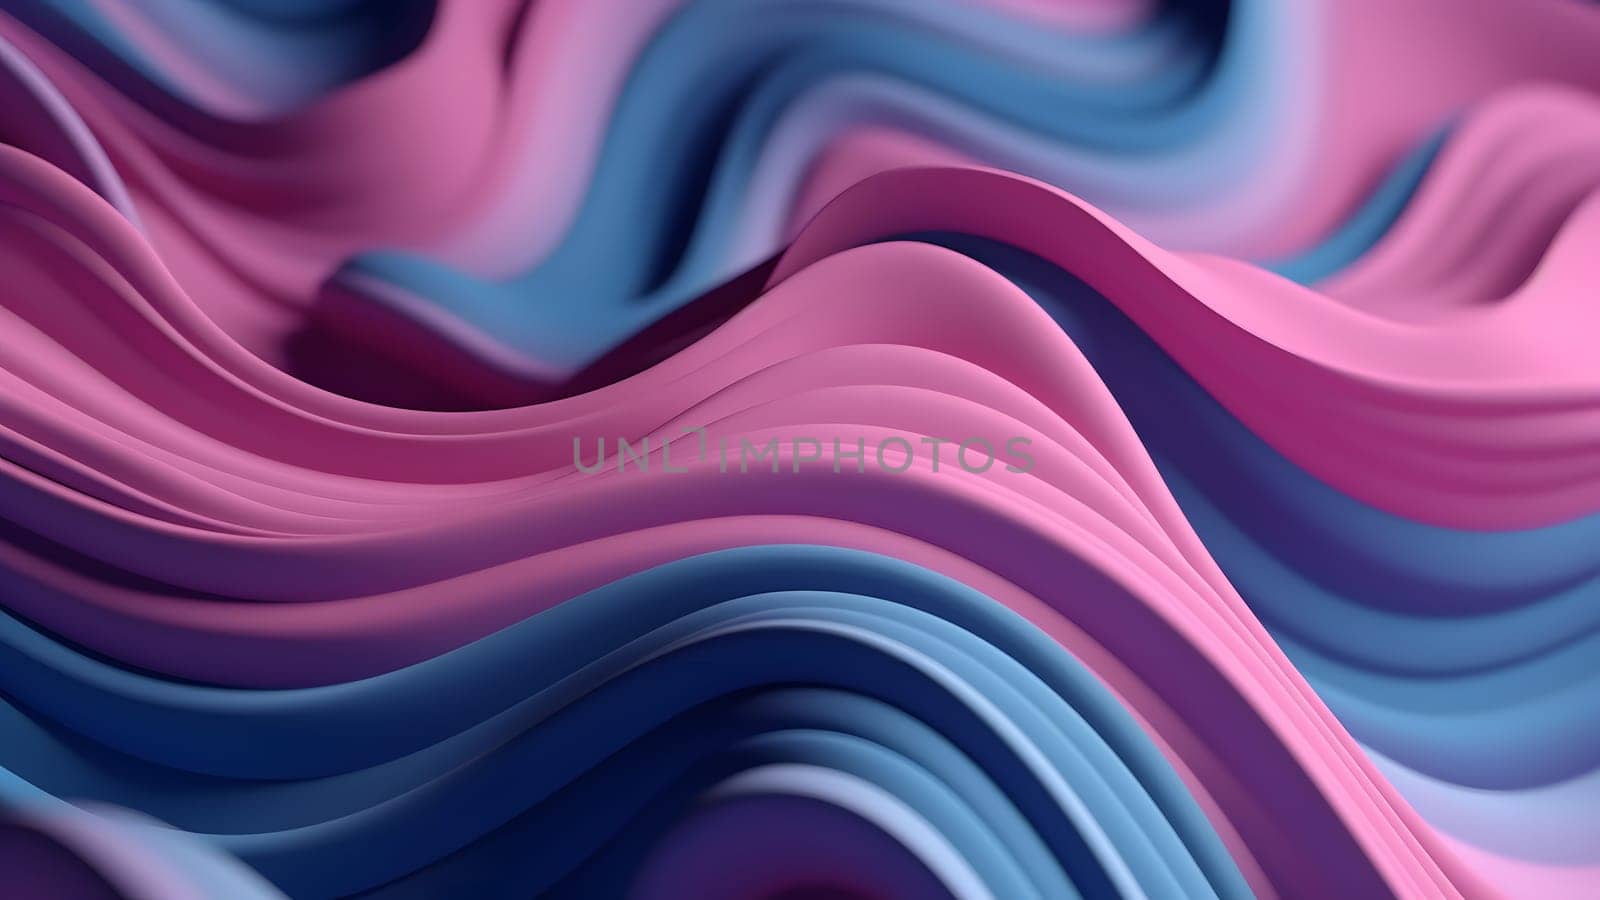 closeup abstract pink and blue volumetric wavy background. Neural network generated in May 2023. Not based on any actual person, scene or pattern.